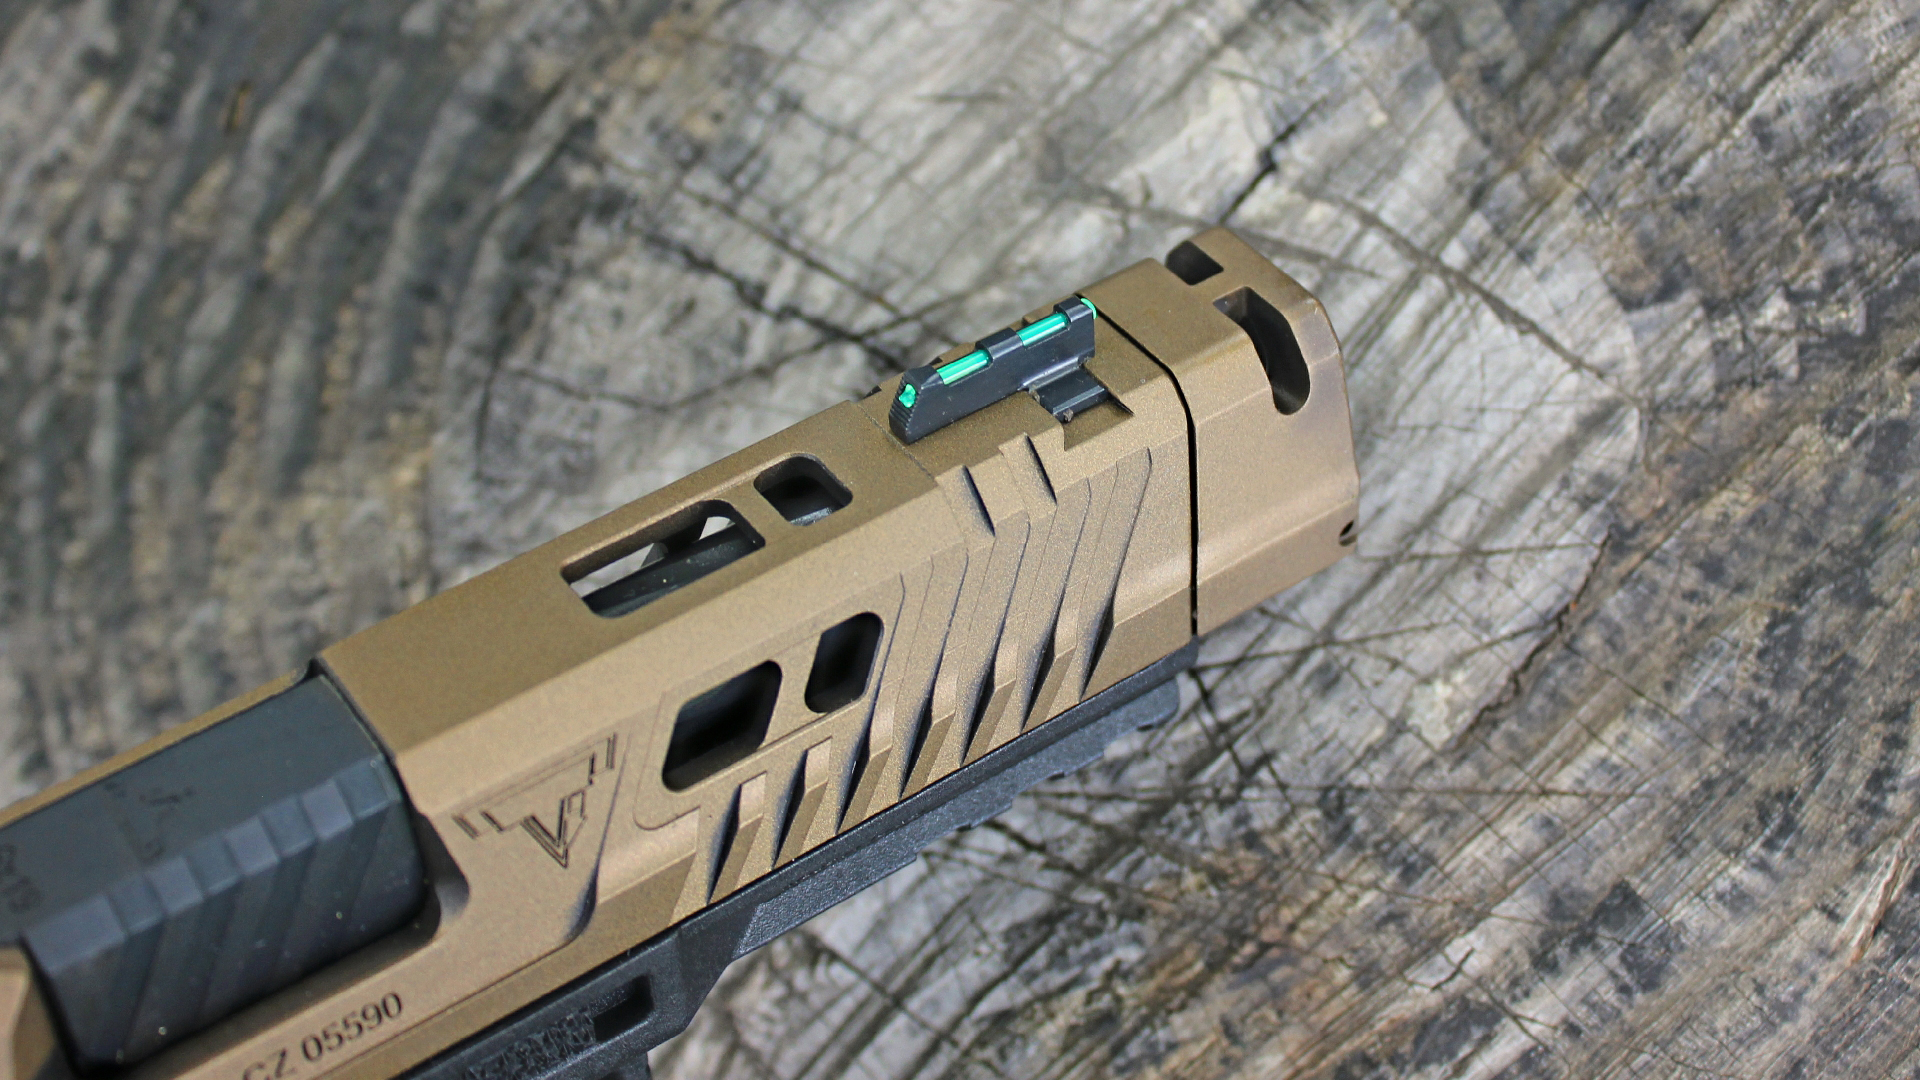 Century Arms Canik TTI Combat 9 mm front sight detail bronze cerakote slide shown with log background